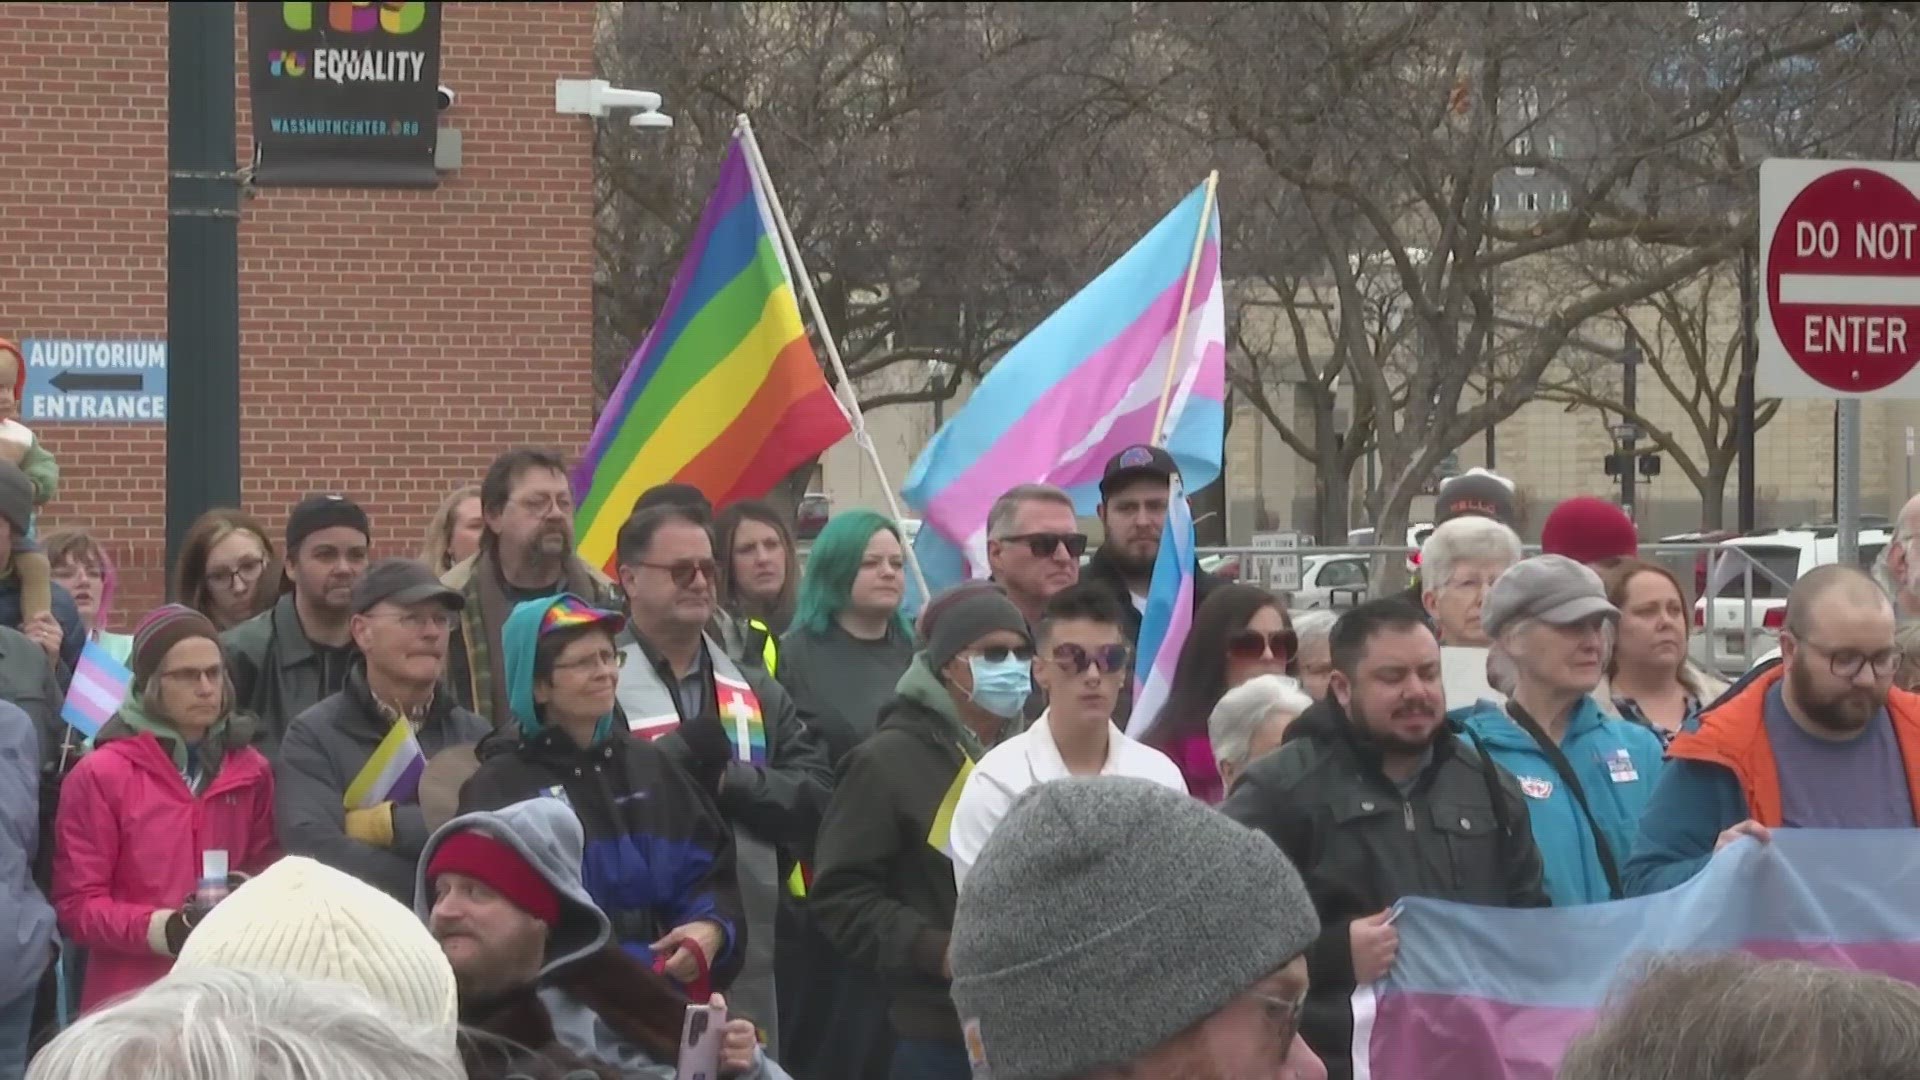 The annual gathering was held as a way for people to share stories and celebrate the transgender community - while also speaking out against House Bill 71.